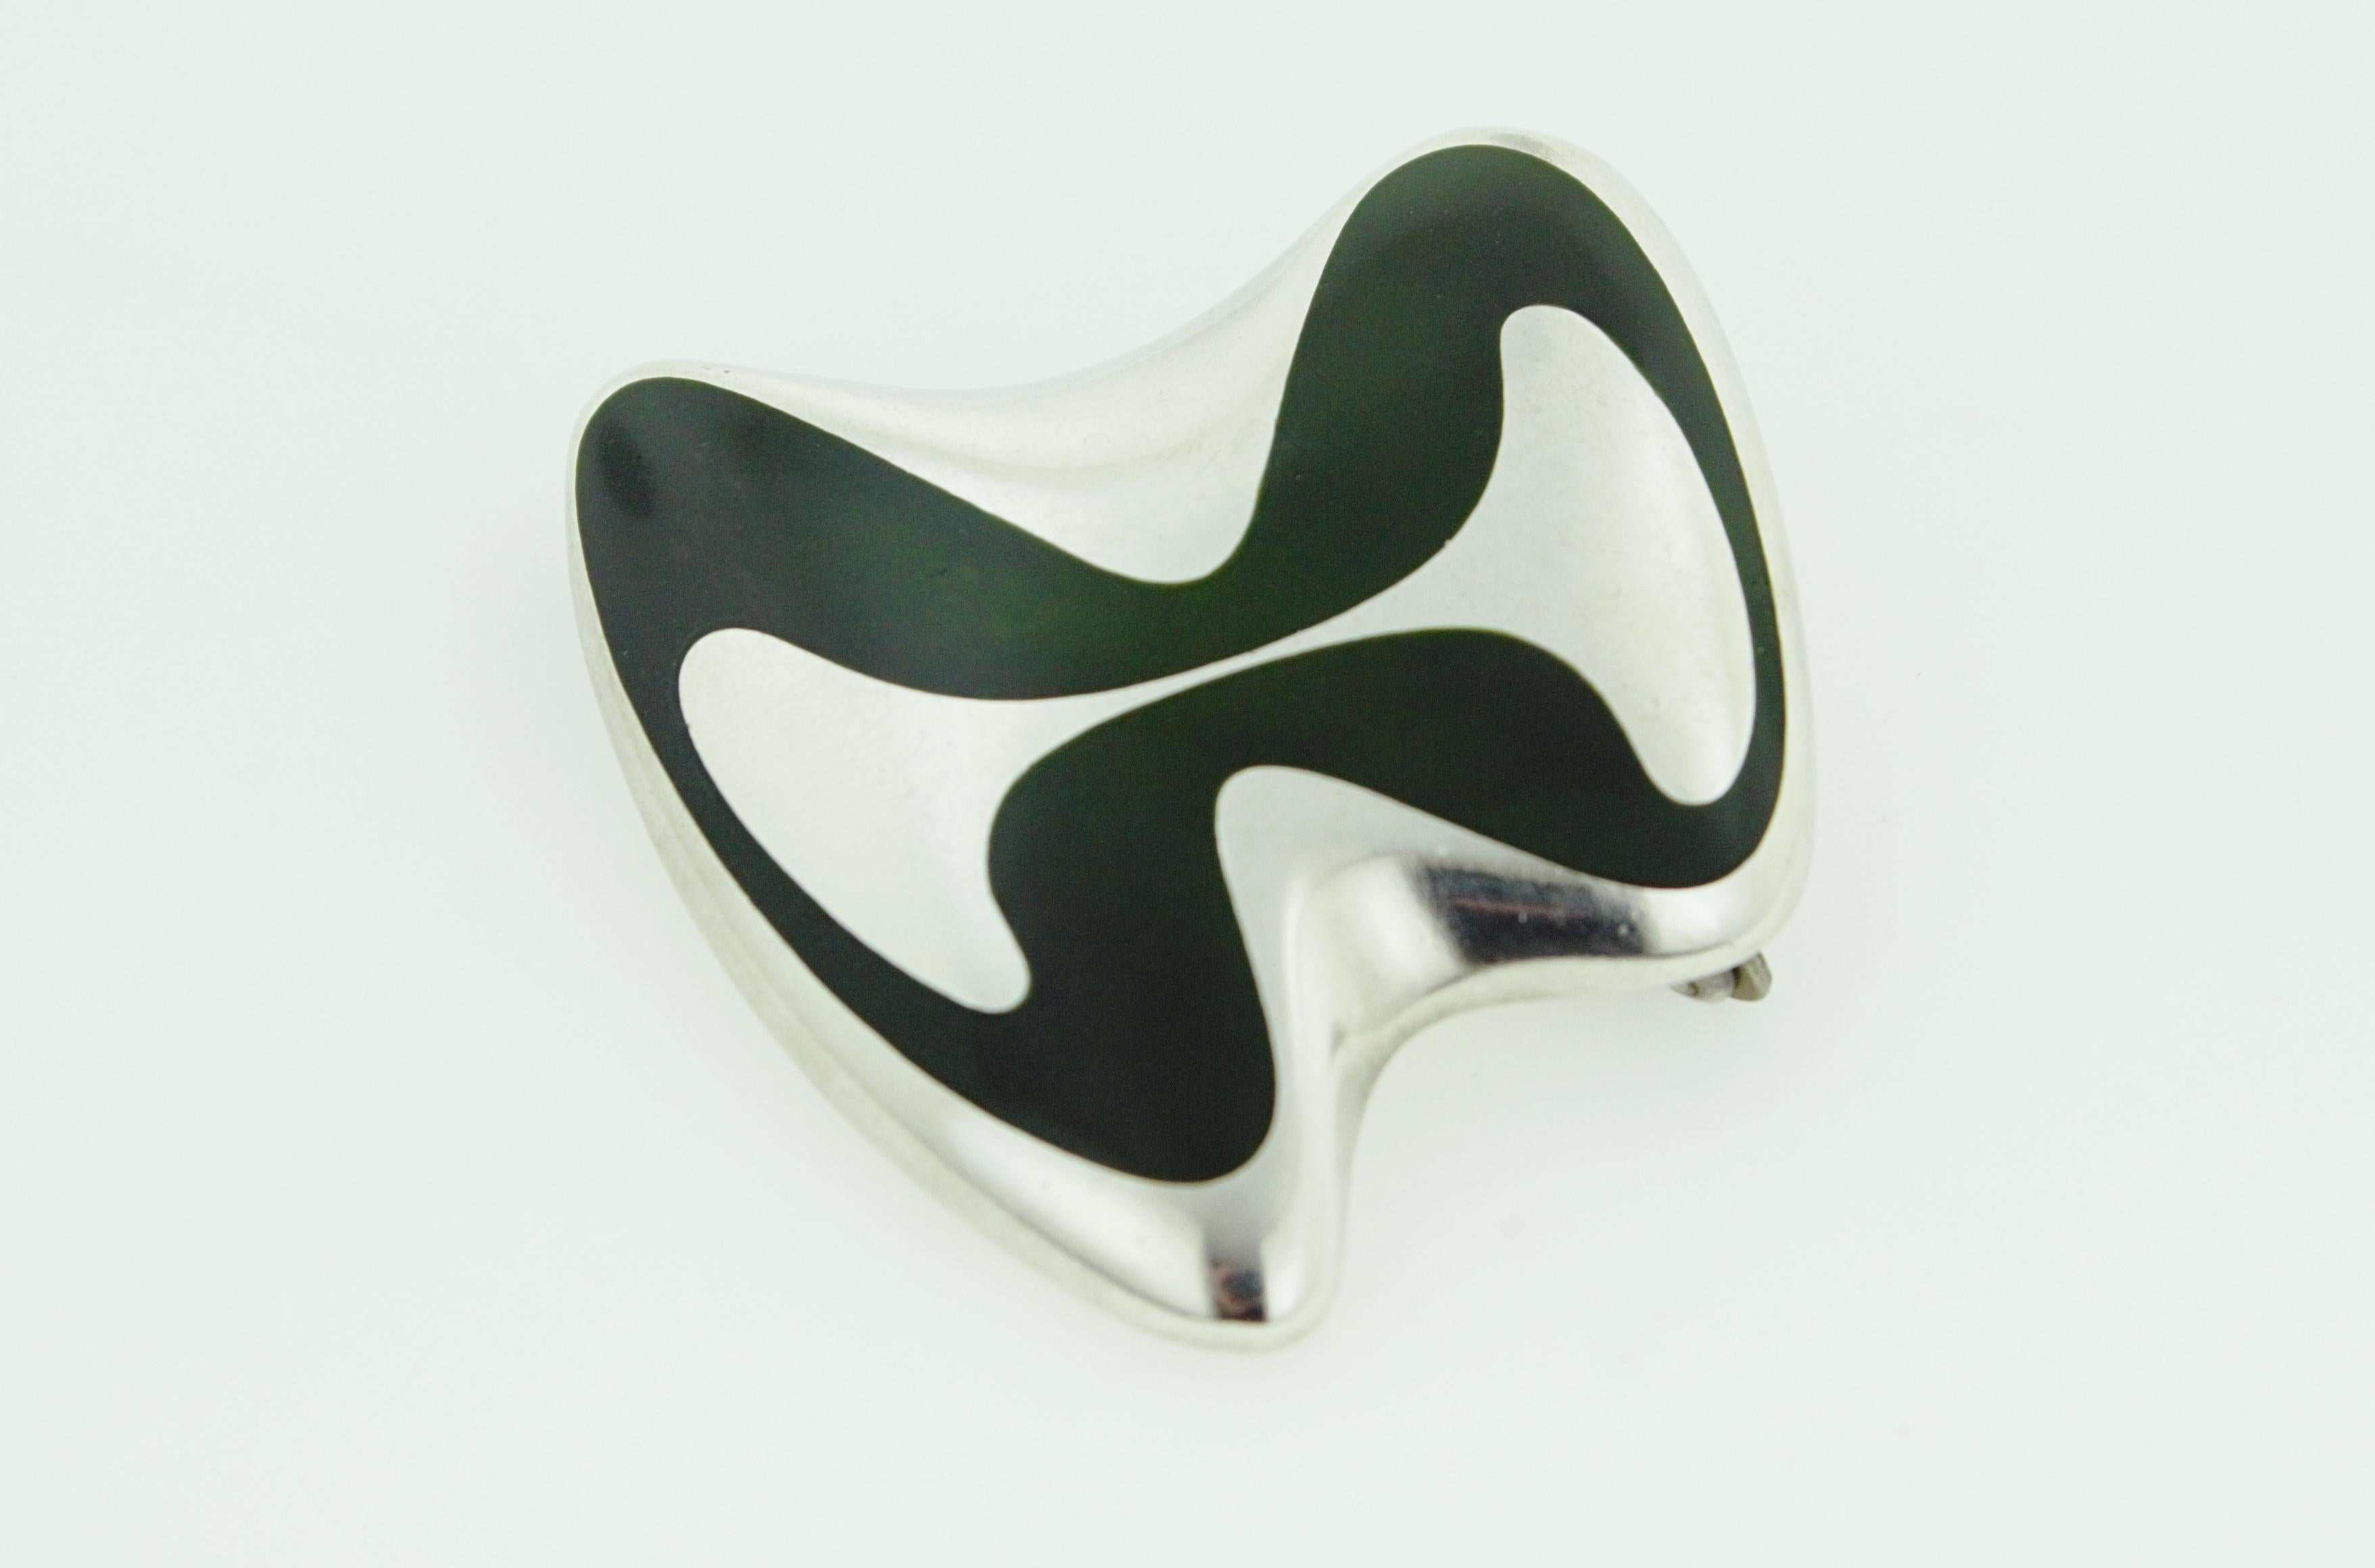 Georg Jensen Henning Koppel, #315, Enamel, Sterling Silver Brooch In Excellent Condition For Sale In Pleasant Hill, CA